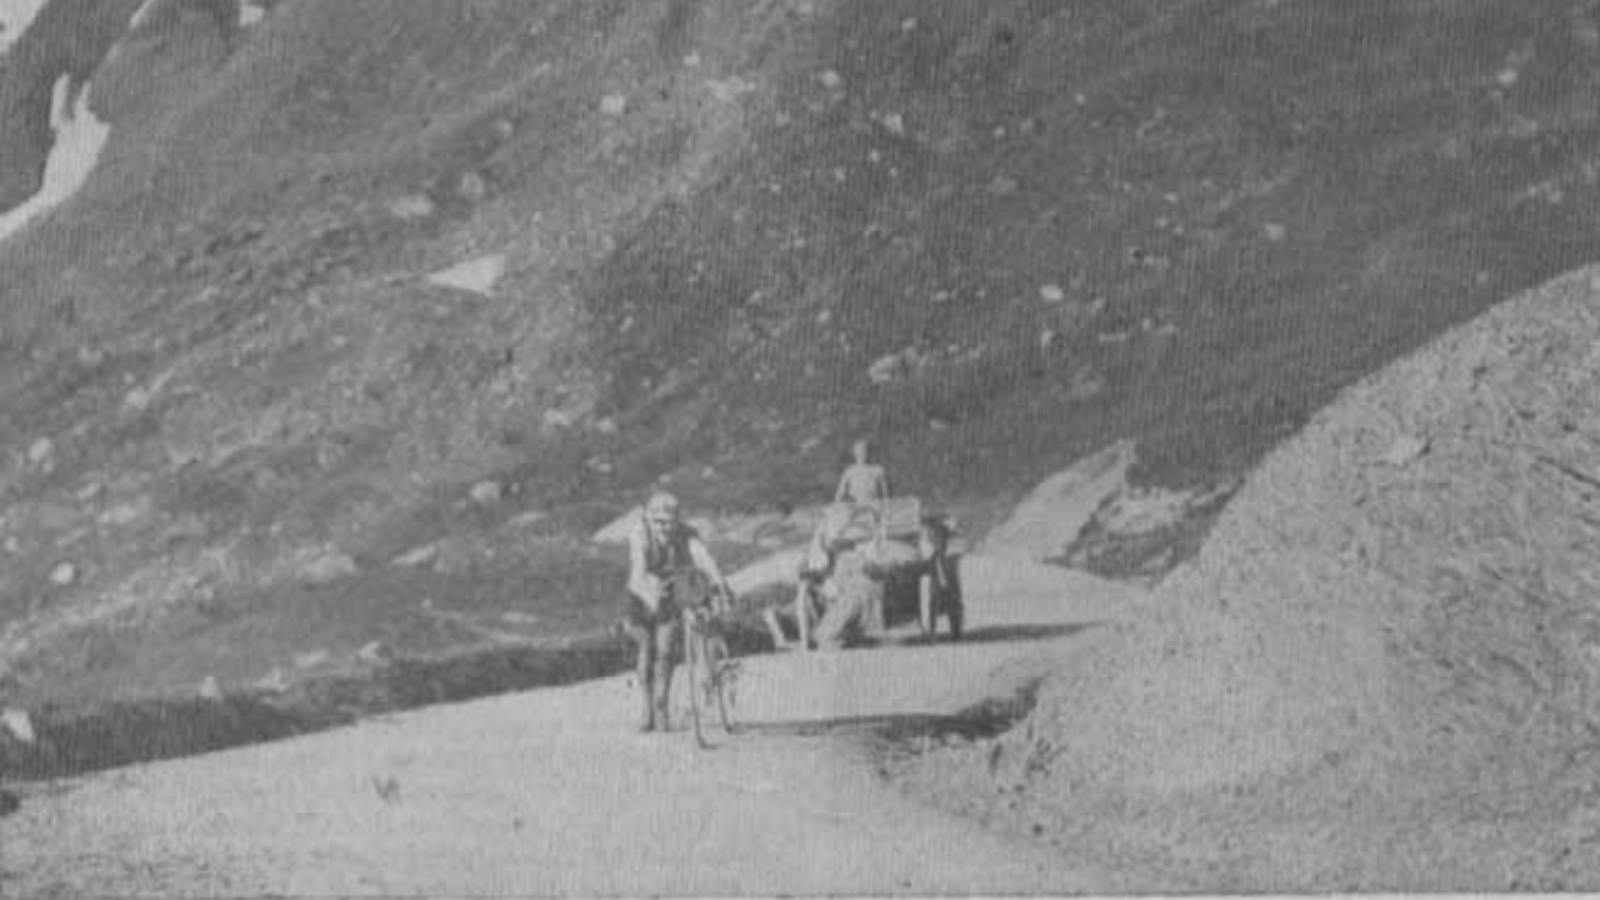 French cyclist Octave Lapize, overall winner of the race climbing the Tourmalet at Tour de France 1910